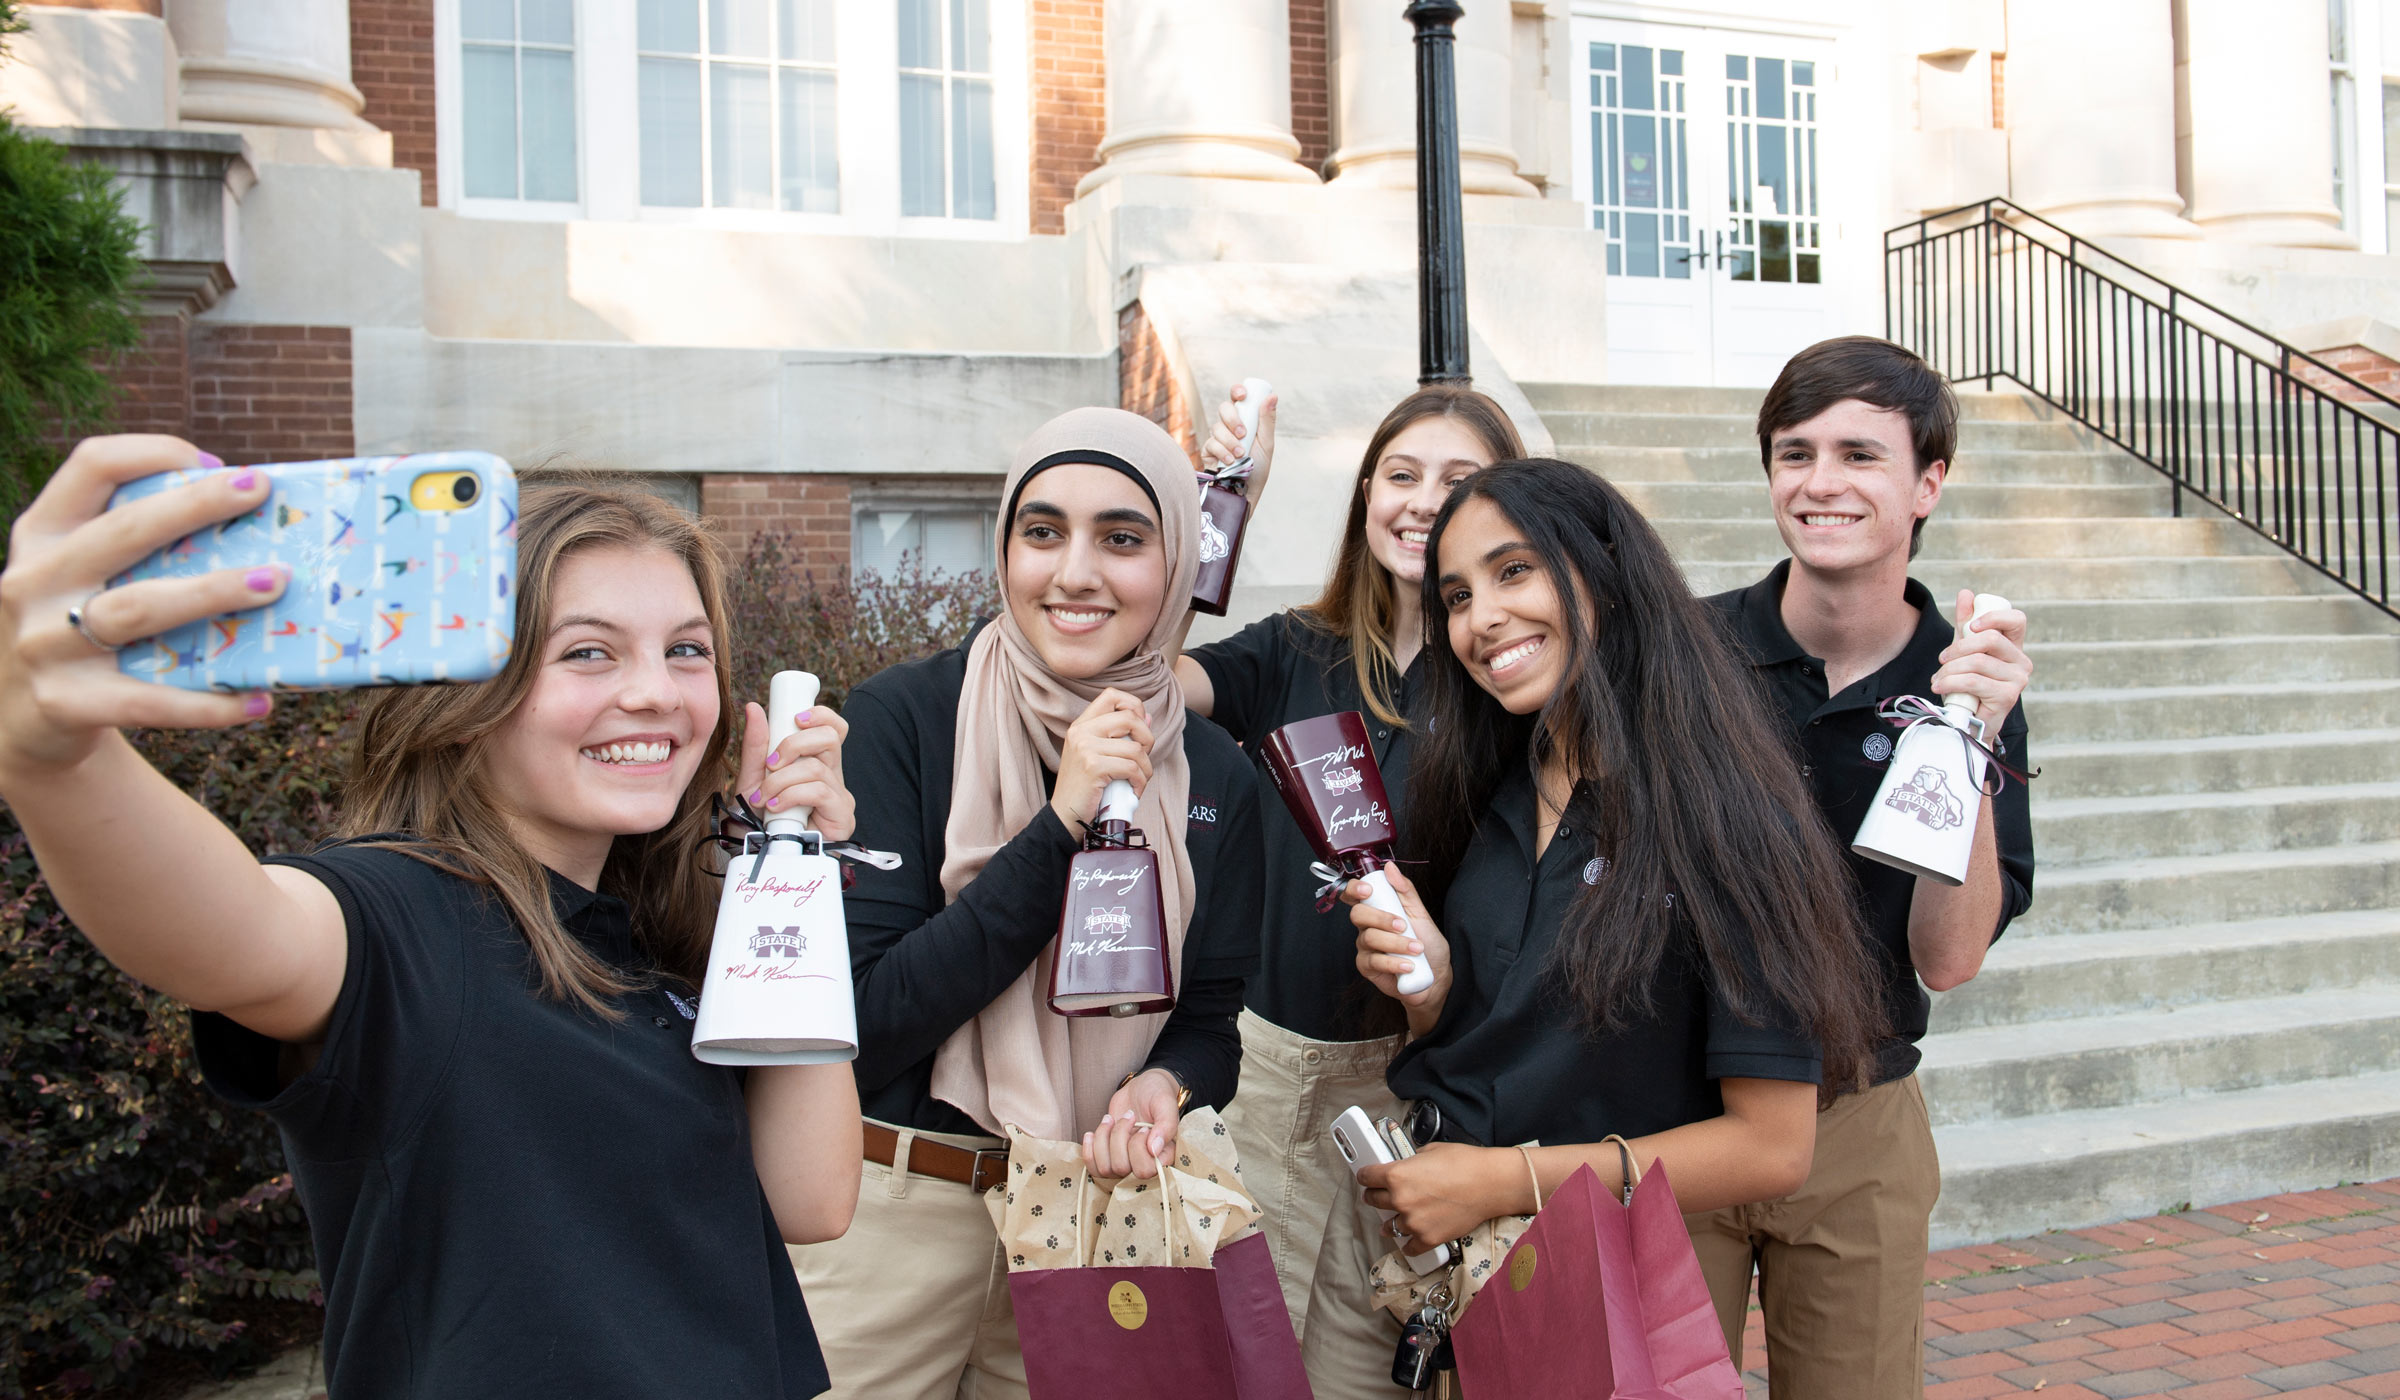 Holding a cell phone up on the left side of the frame, a female student takes a selfie with four fellow Presidential Scholars, each holding up their cowbell presents from President Keenum.